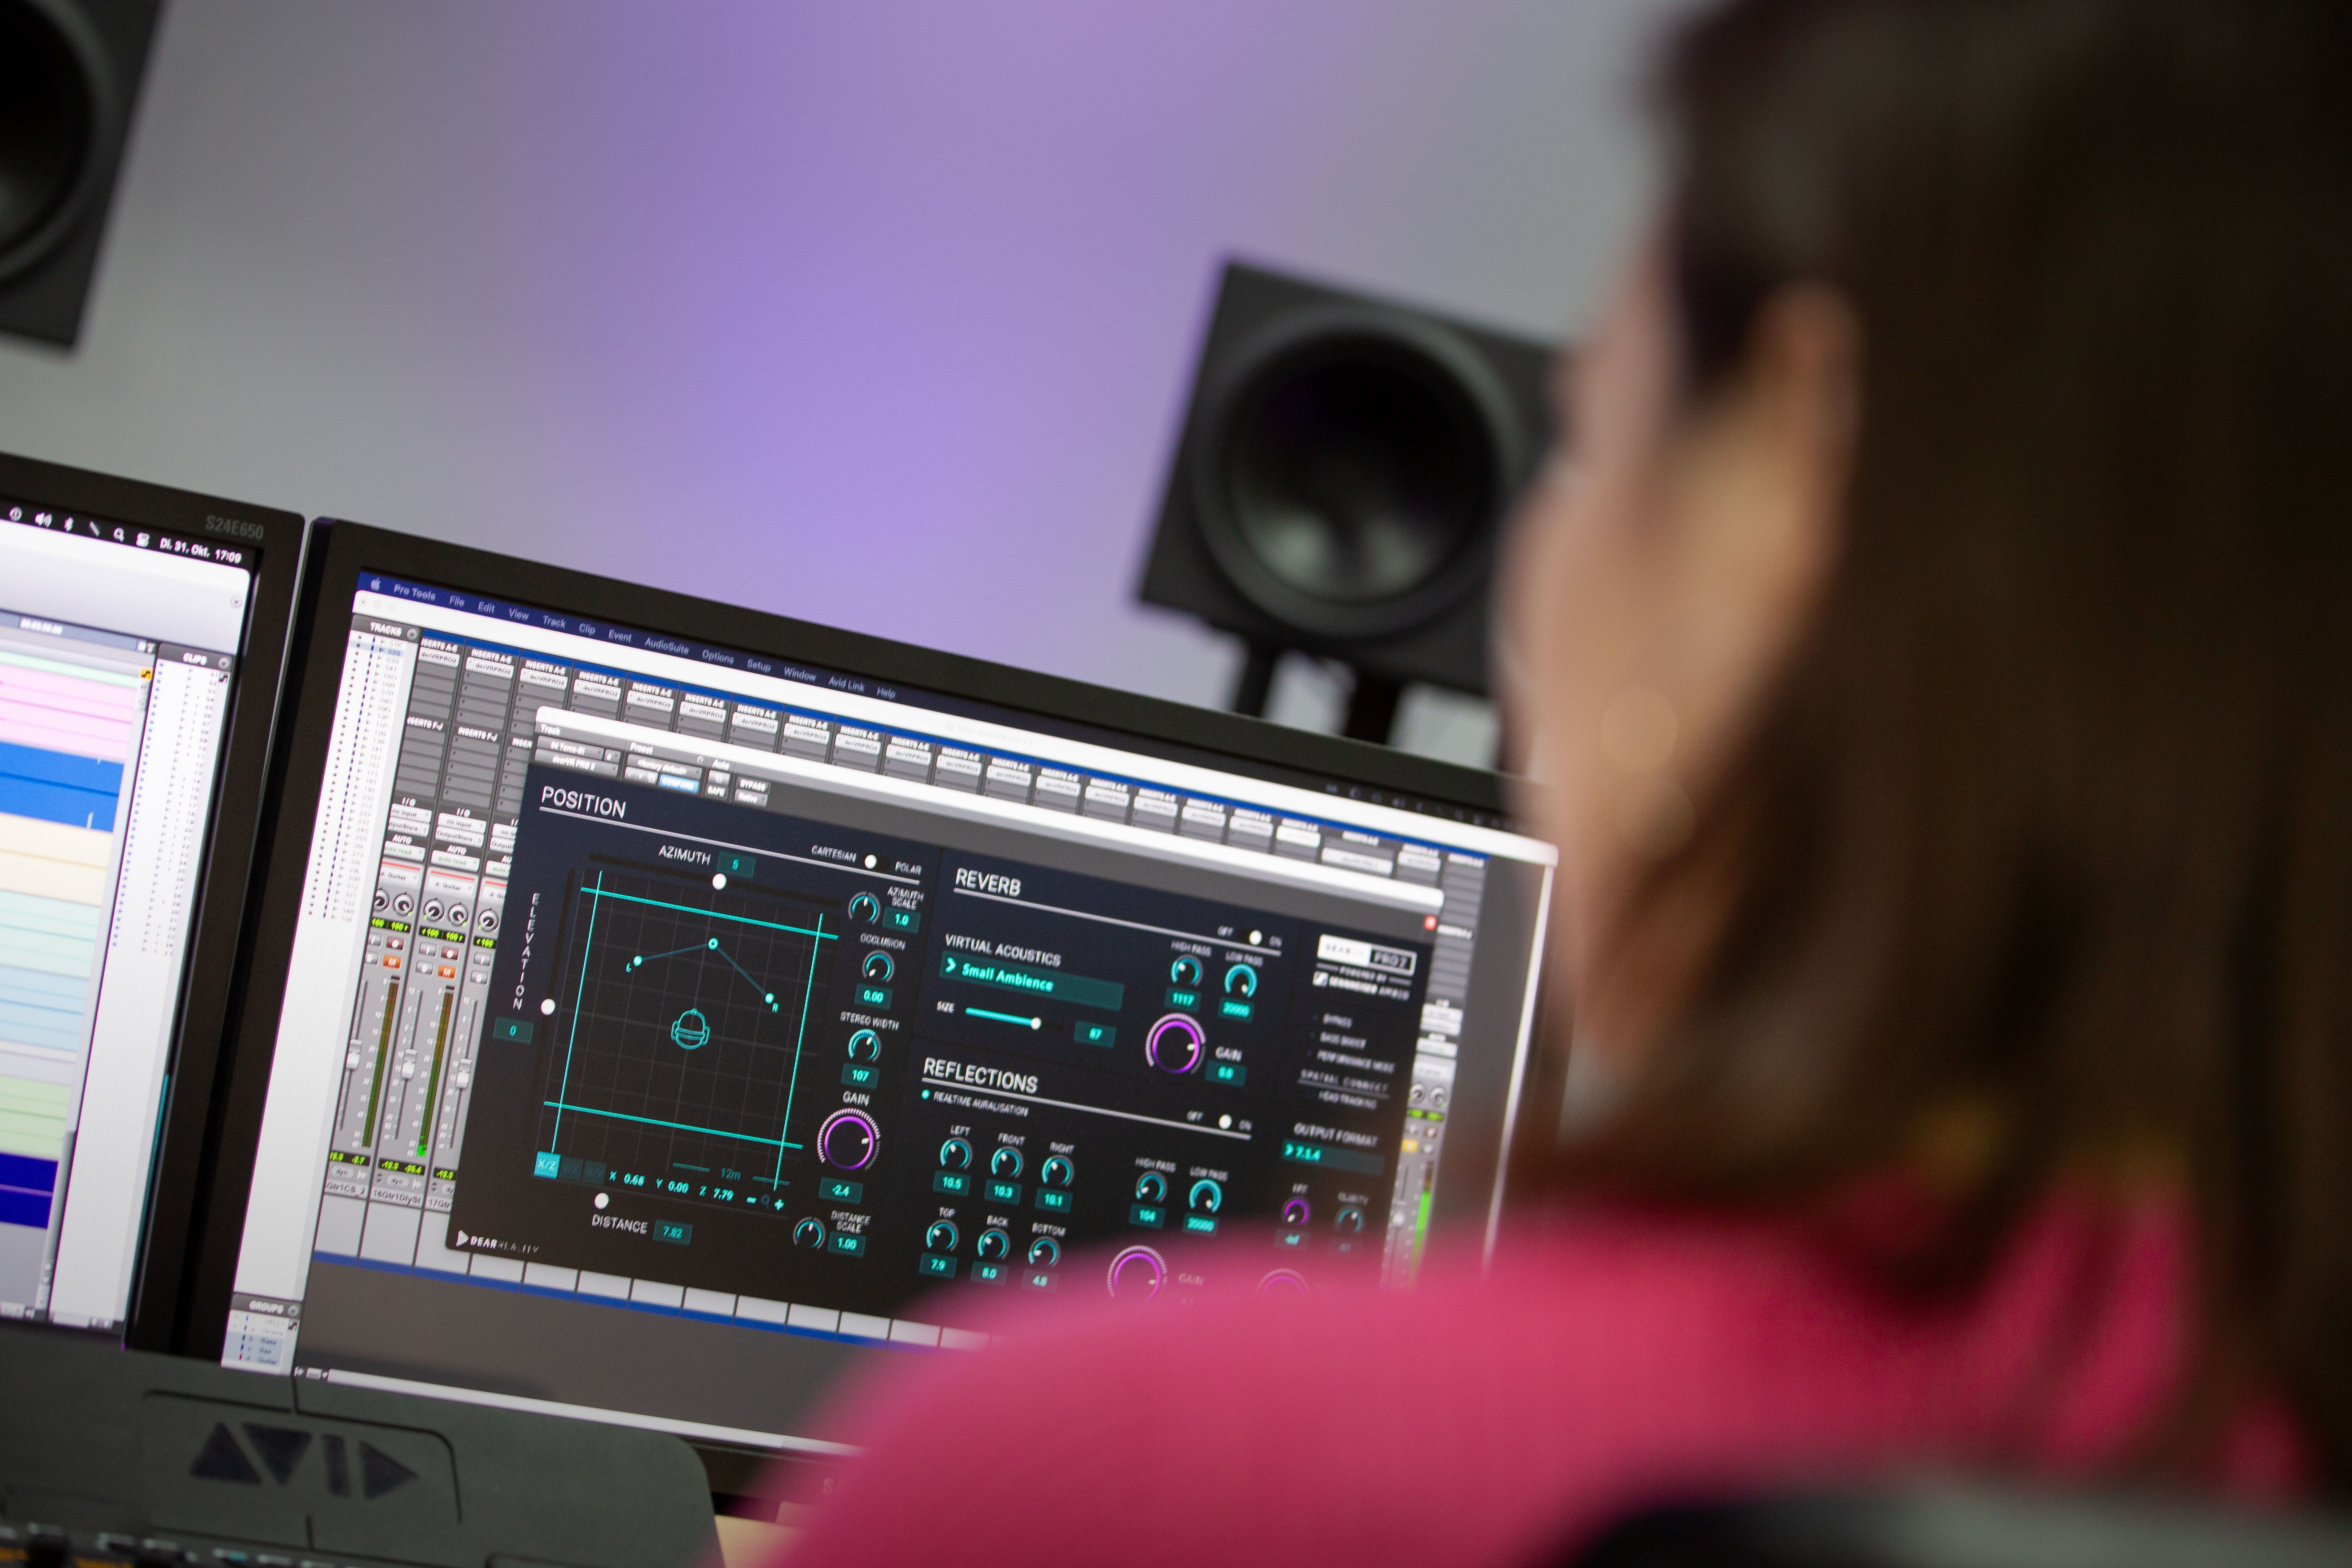 Dear Reality will show the successor of its dearVR PRO spatializer. dearVR PRO 2 adds a stereo input, gives users access to new immersive Pro Tools formats, features new high-pass and low-pass filters for early reflections and late reverb, and supports OSC head trackers